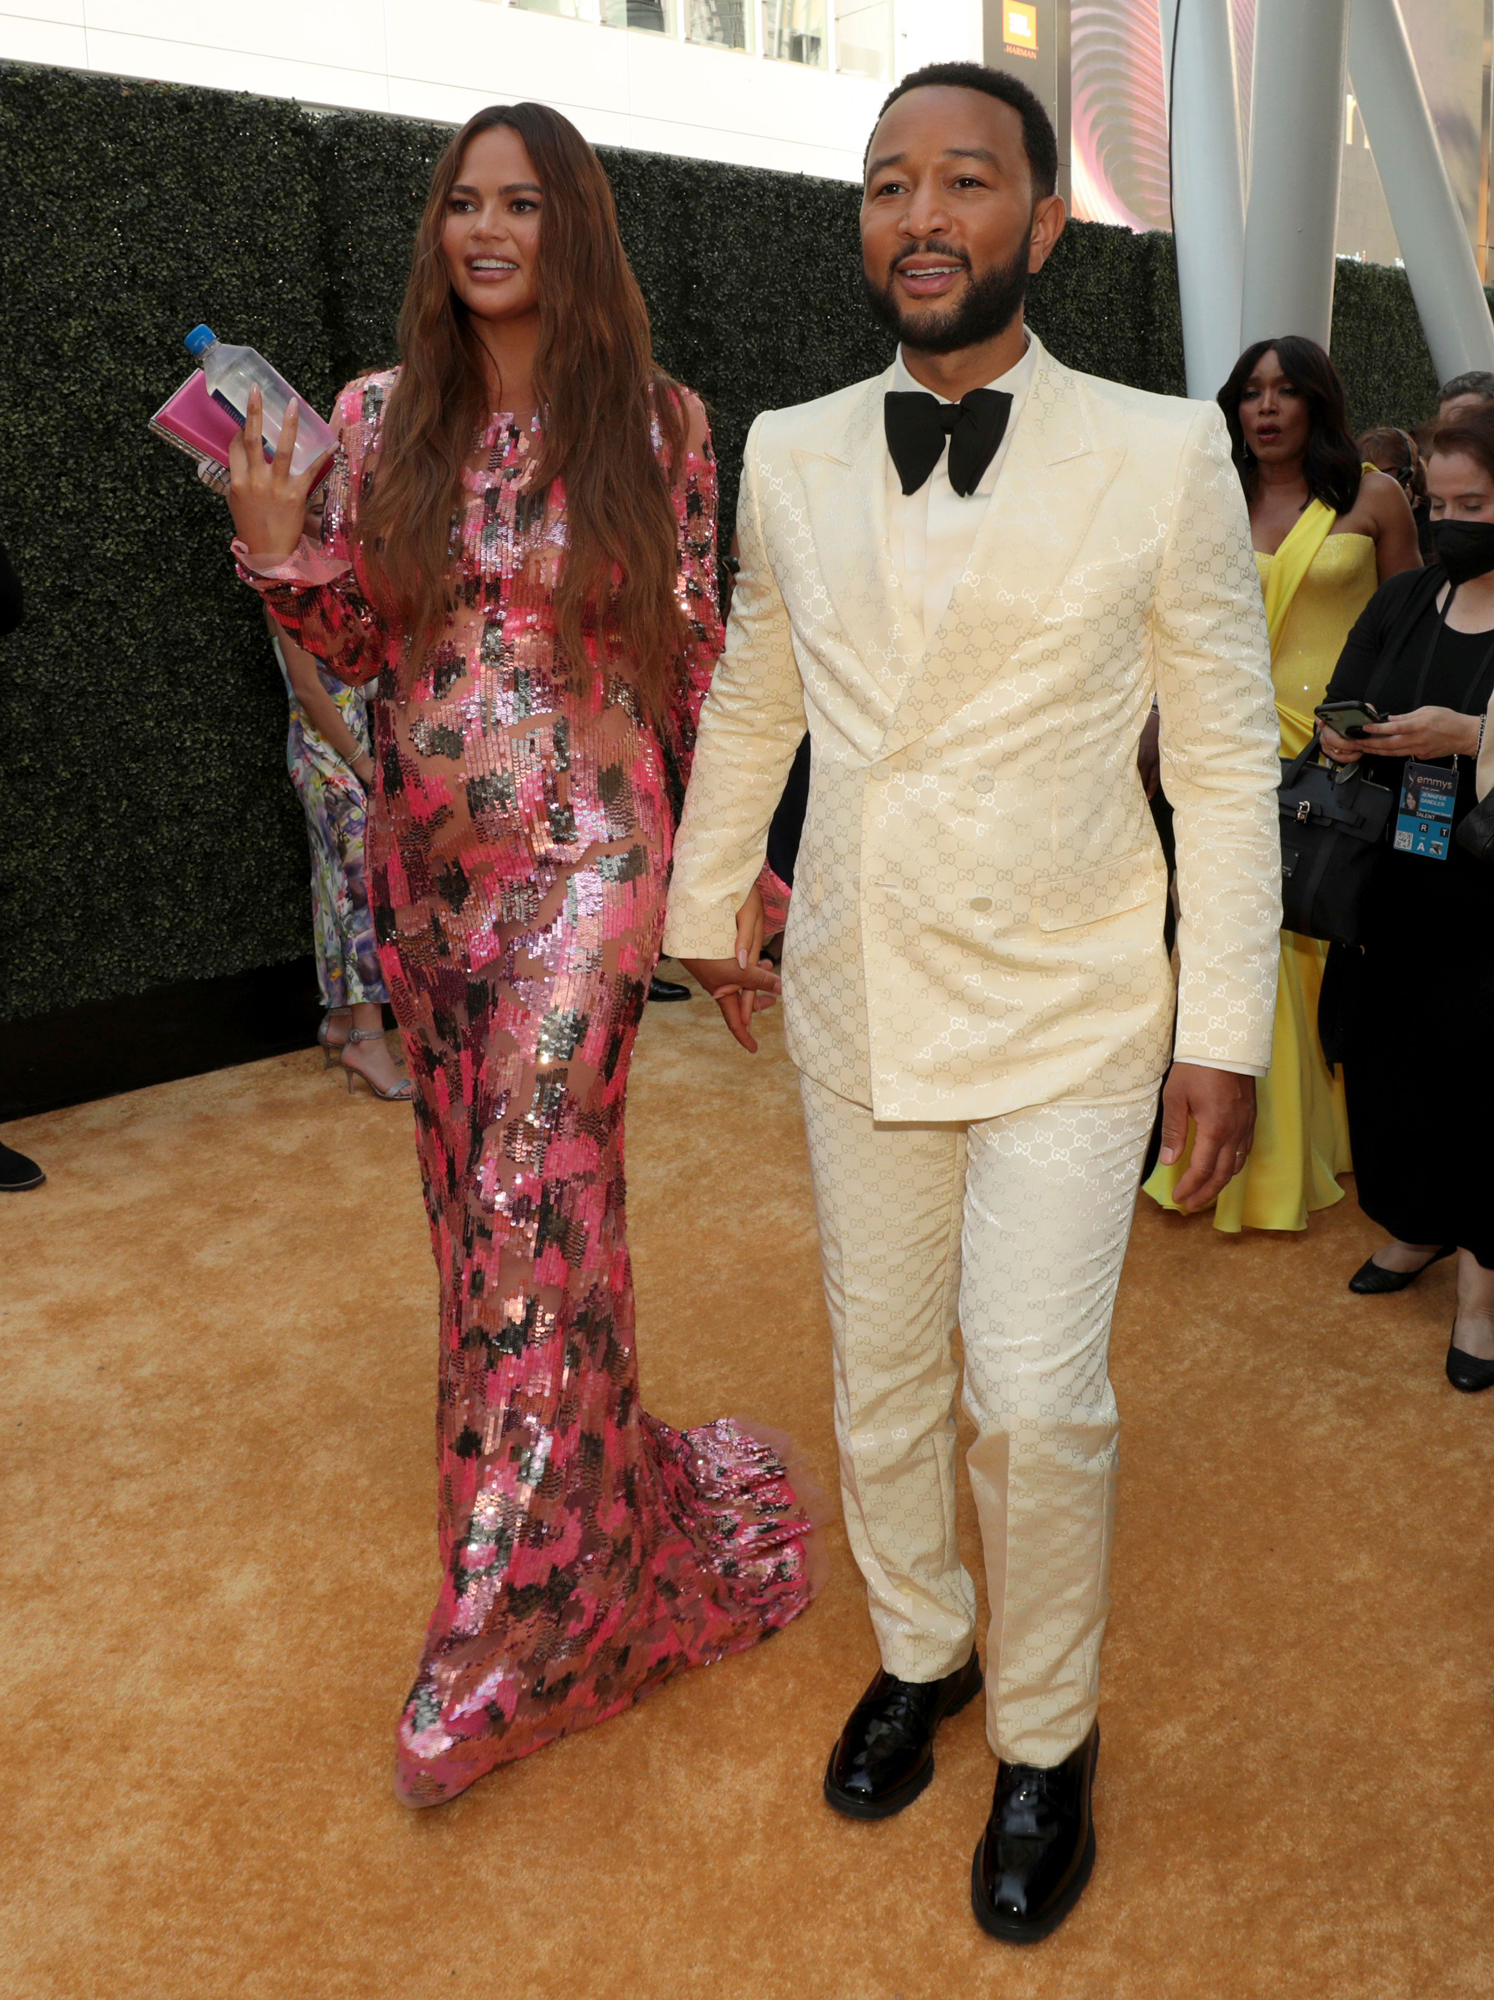 Pregnant Chrissy Teigan Shows Off Her Baby Bump Alongside Husband John Legend at the 2022 Emmy Awards Red Carpet